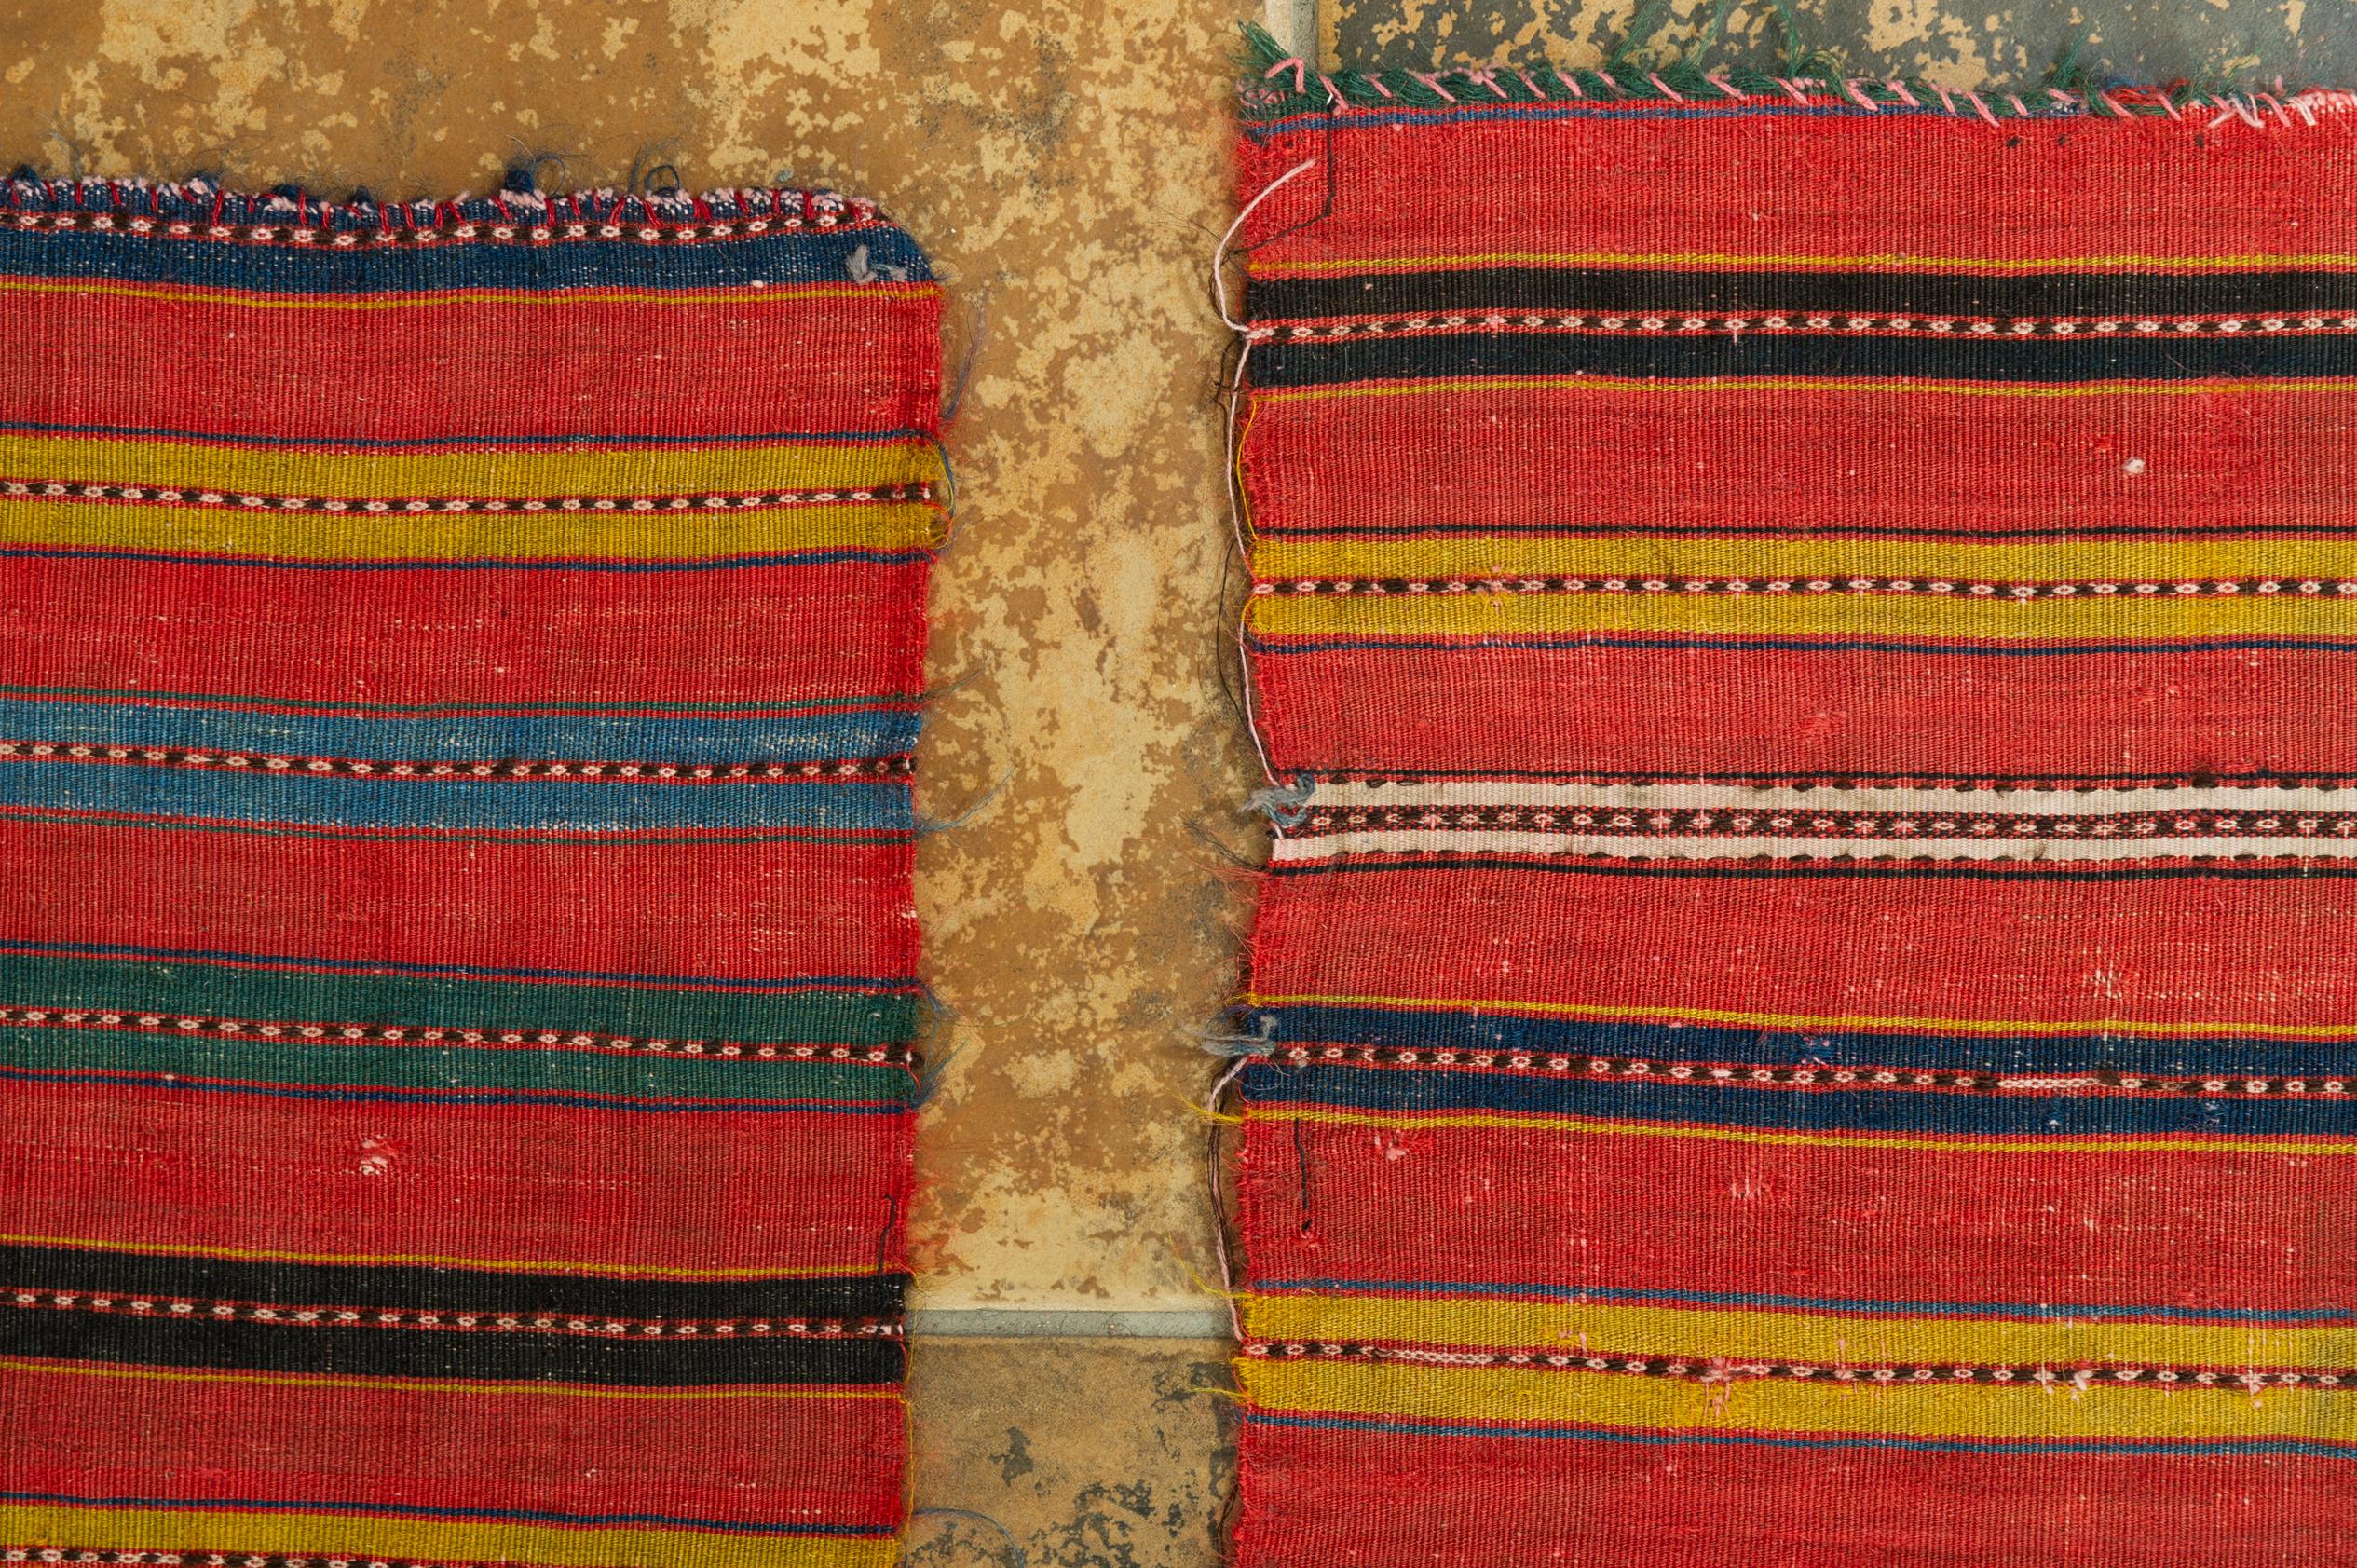 Hand-Woven Old Textile Oriental Fabric For Sale